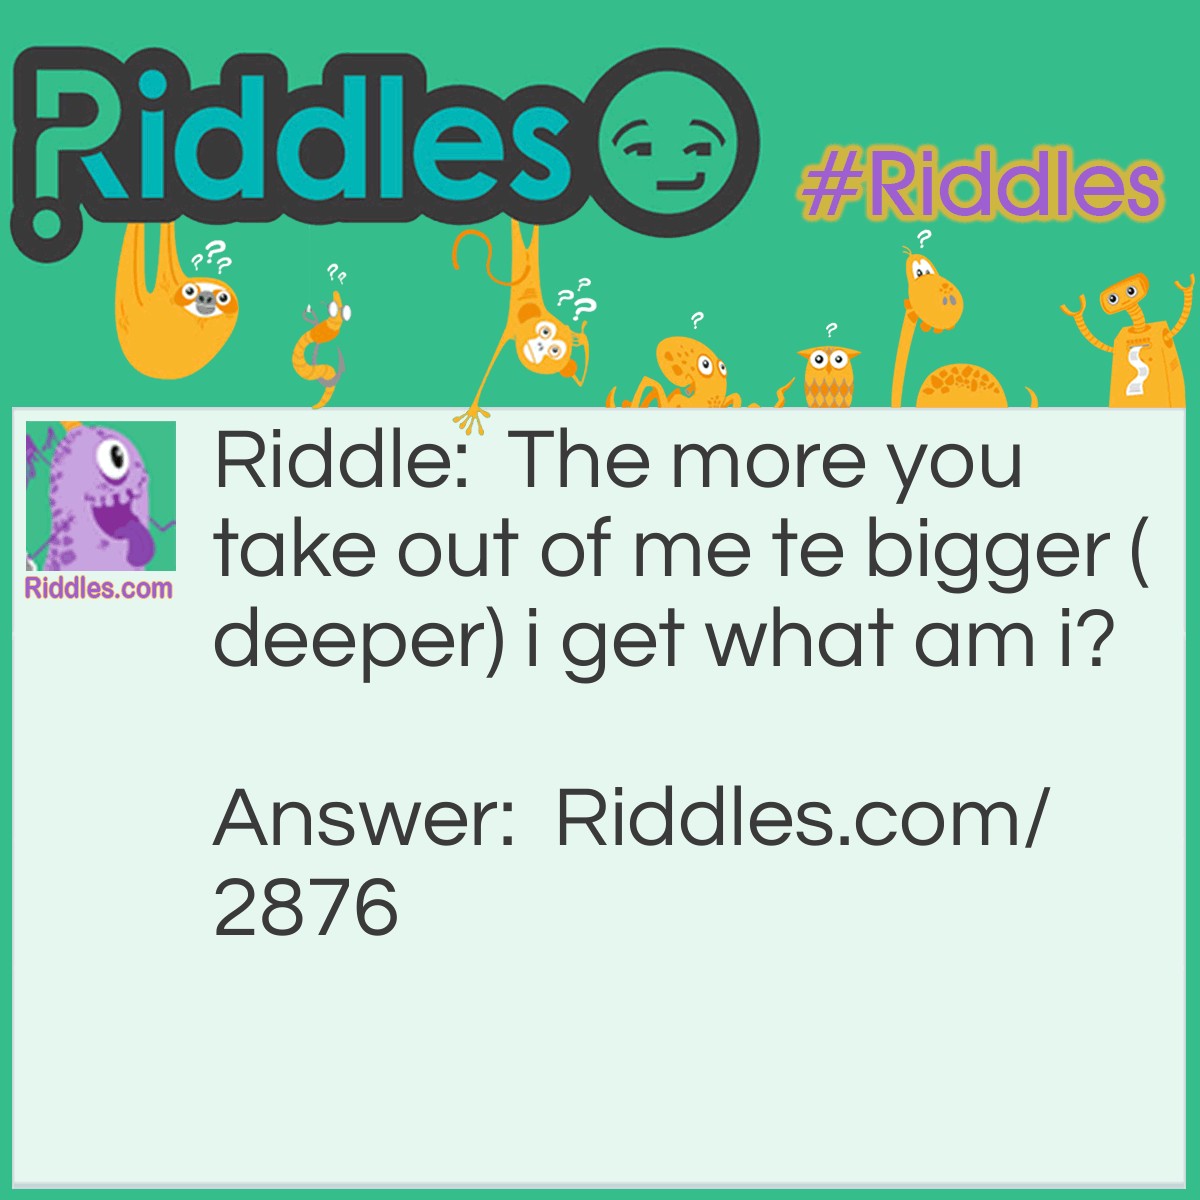 Riddle: The more you take out of me te bigger (deeper) I get. What am I? Answer: A hole.